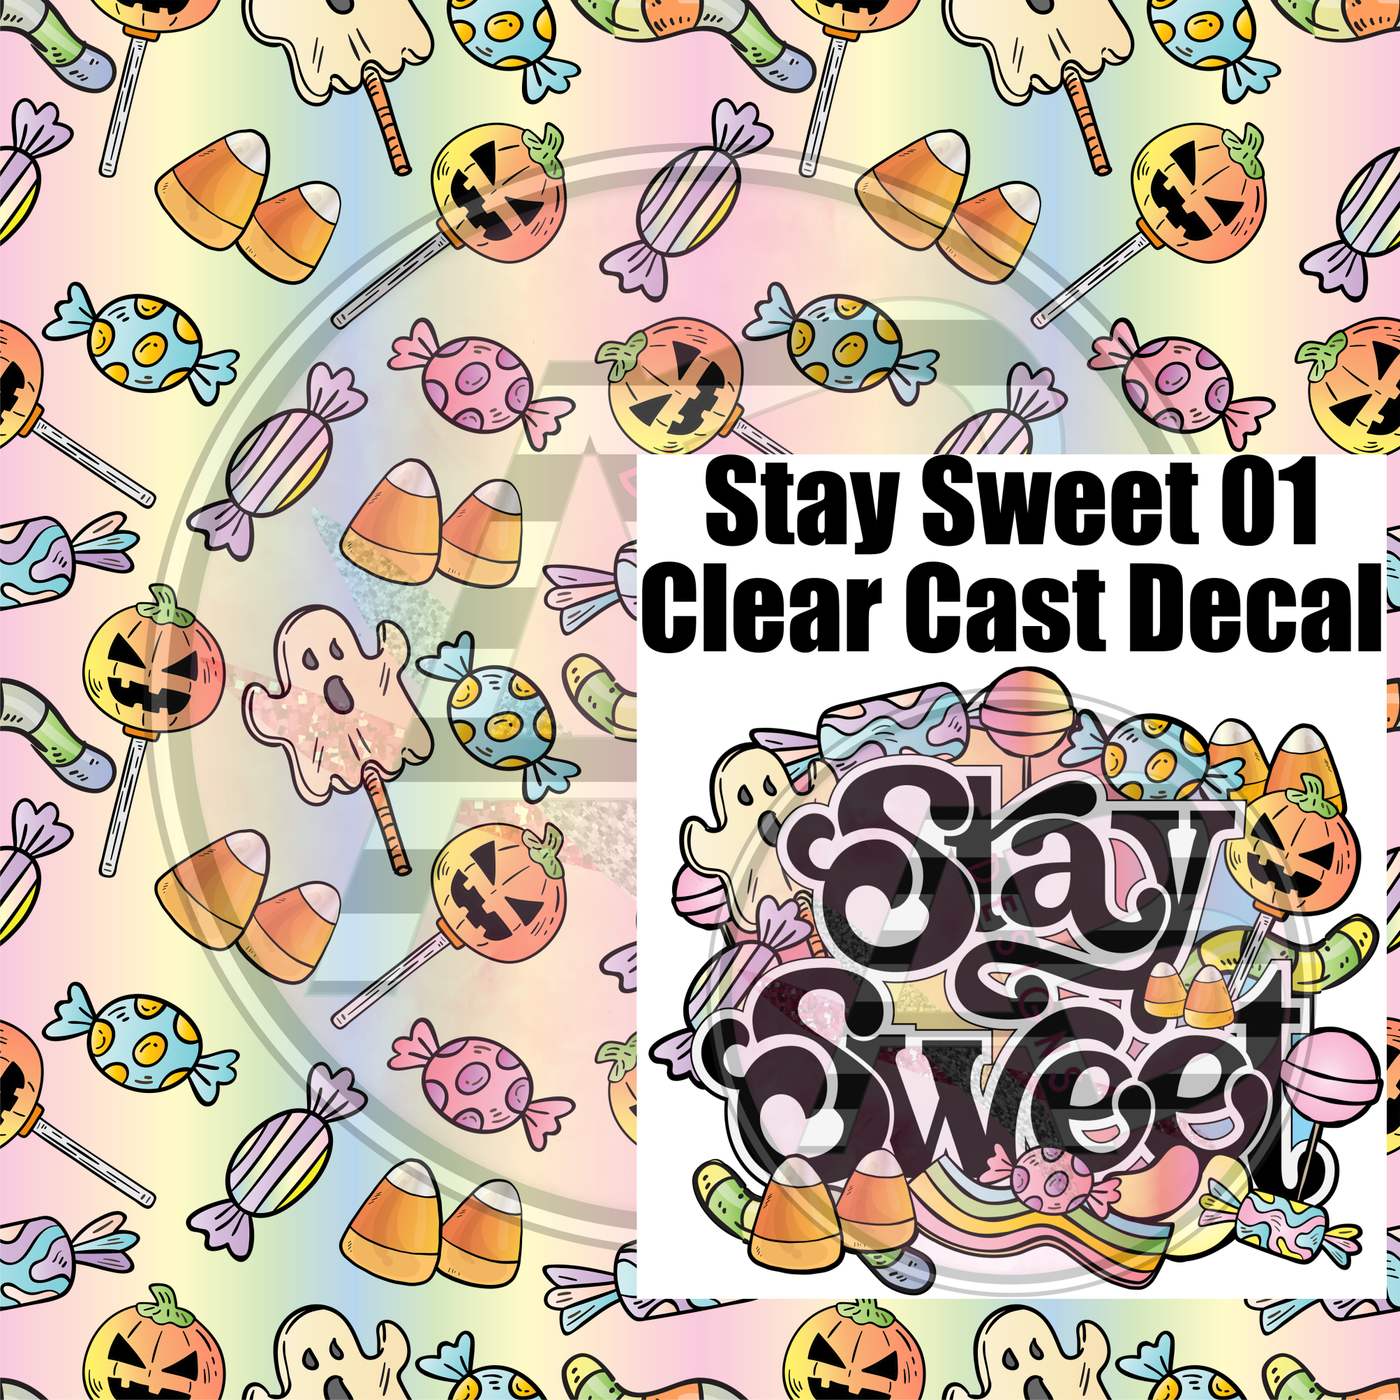 Adhesive Patterned Vinyl - Stay Sweet 01